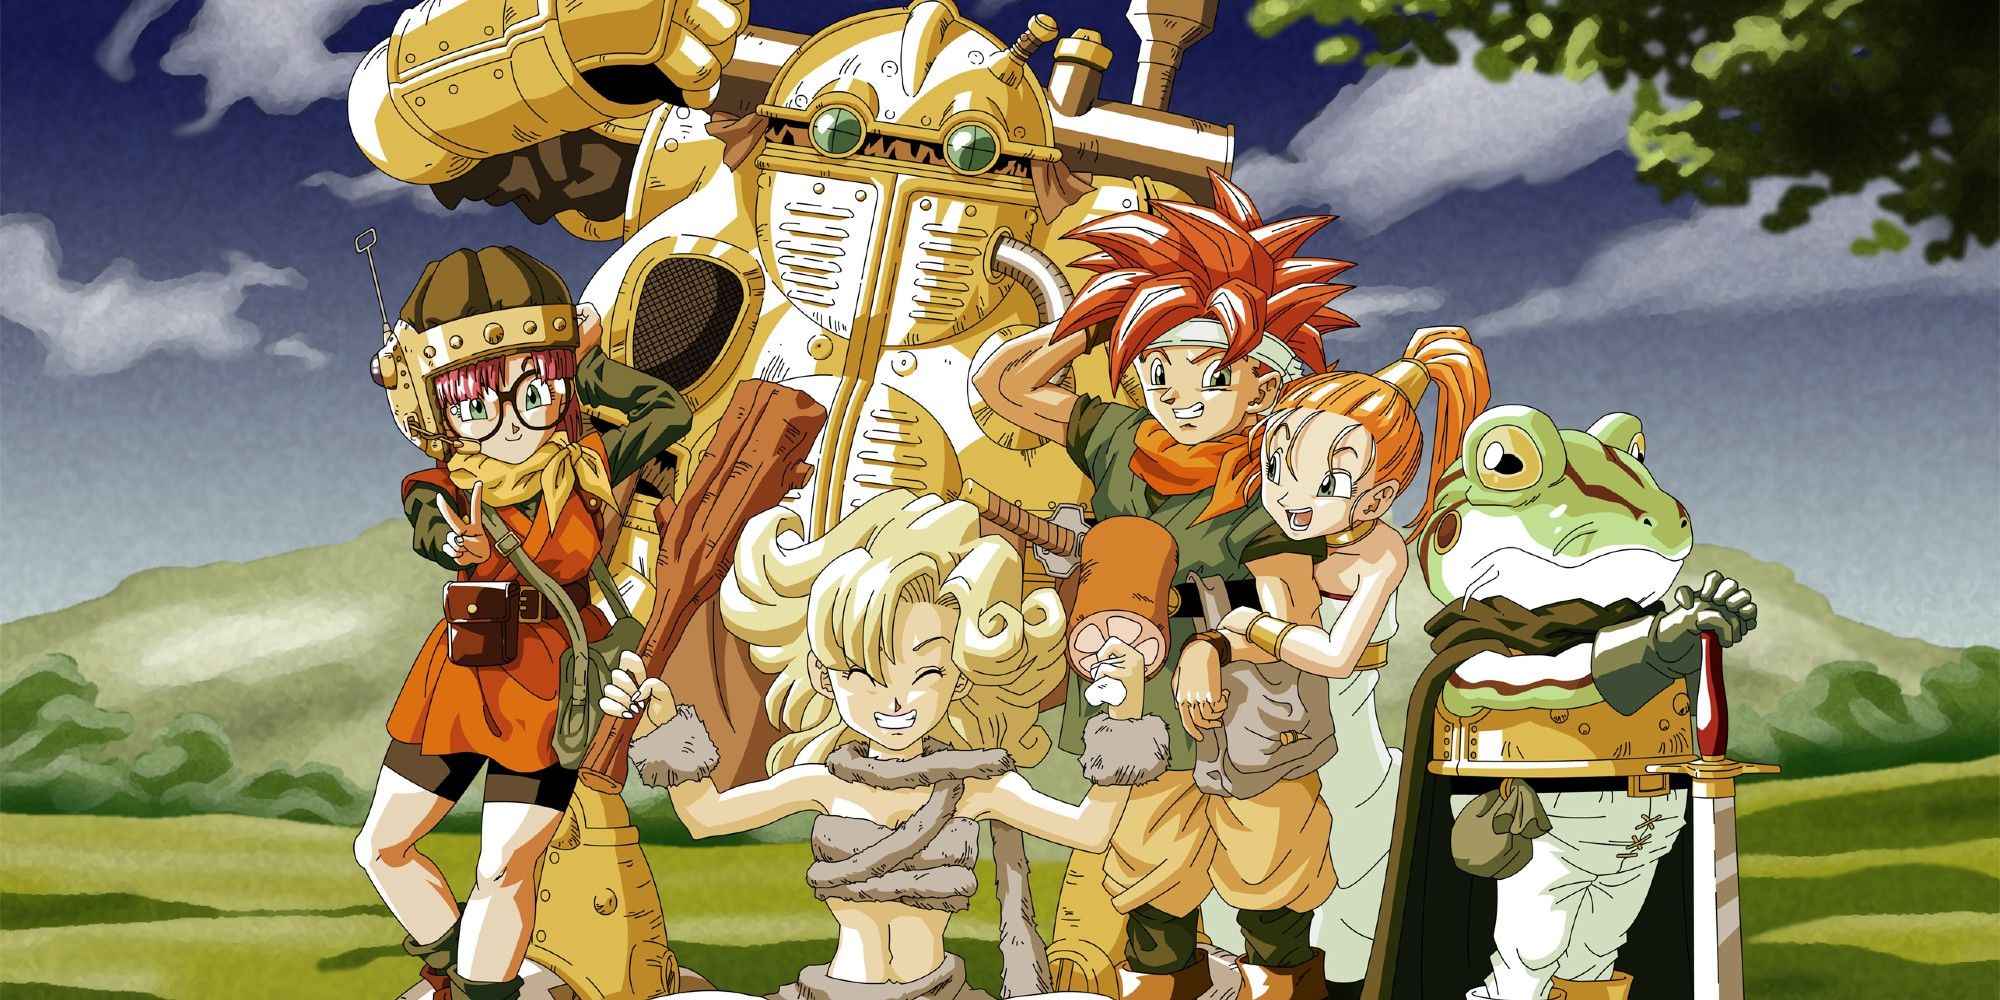 The party of Chrono Trigger posing in a green field.